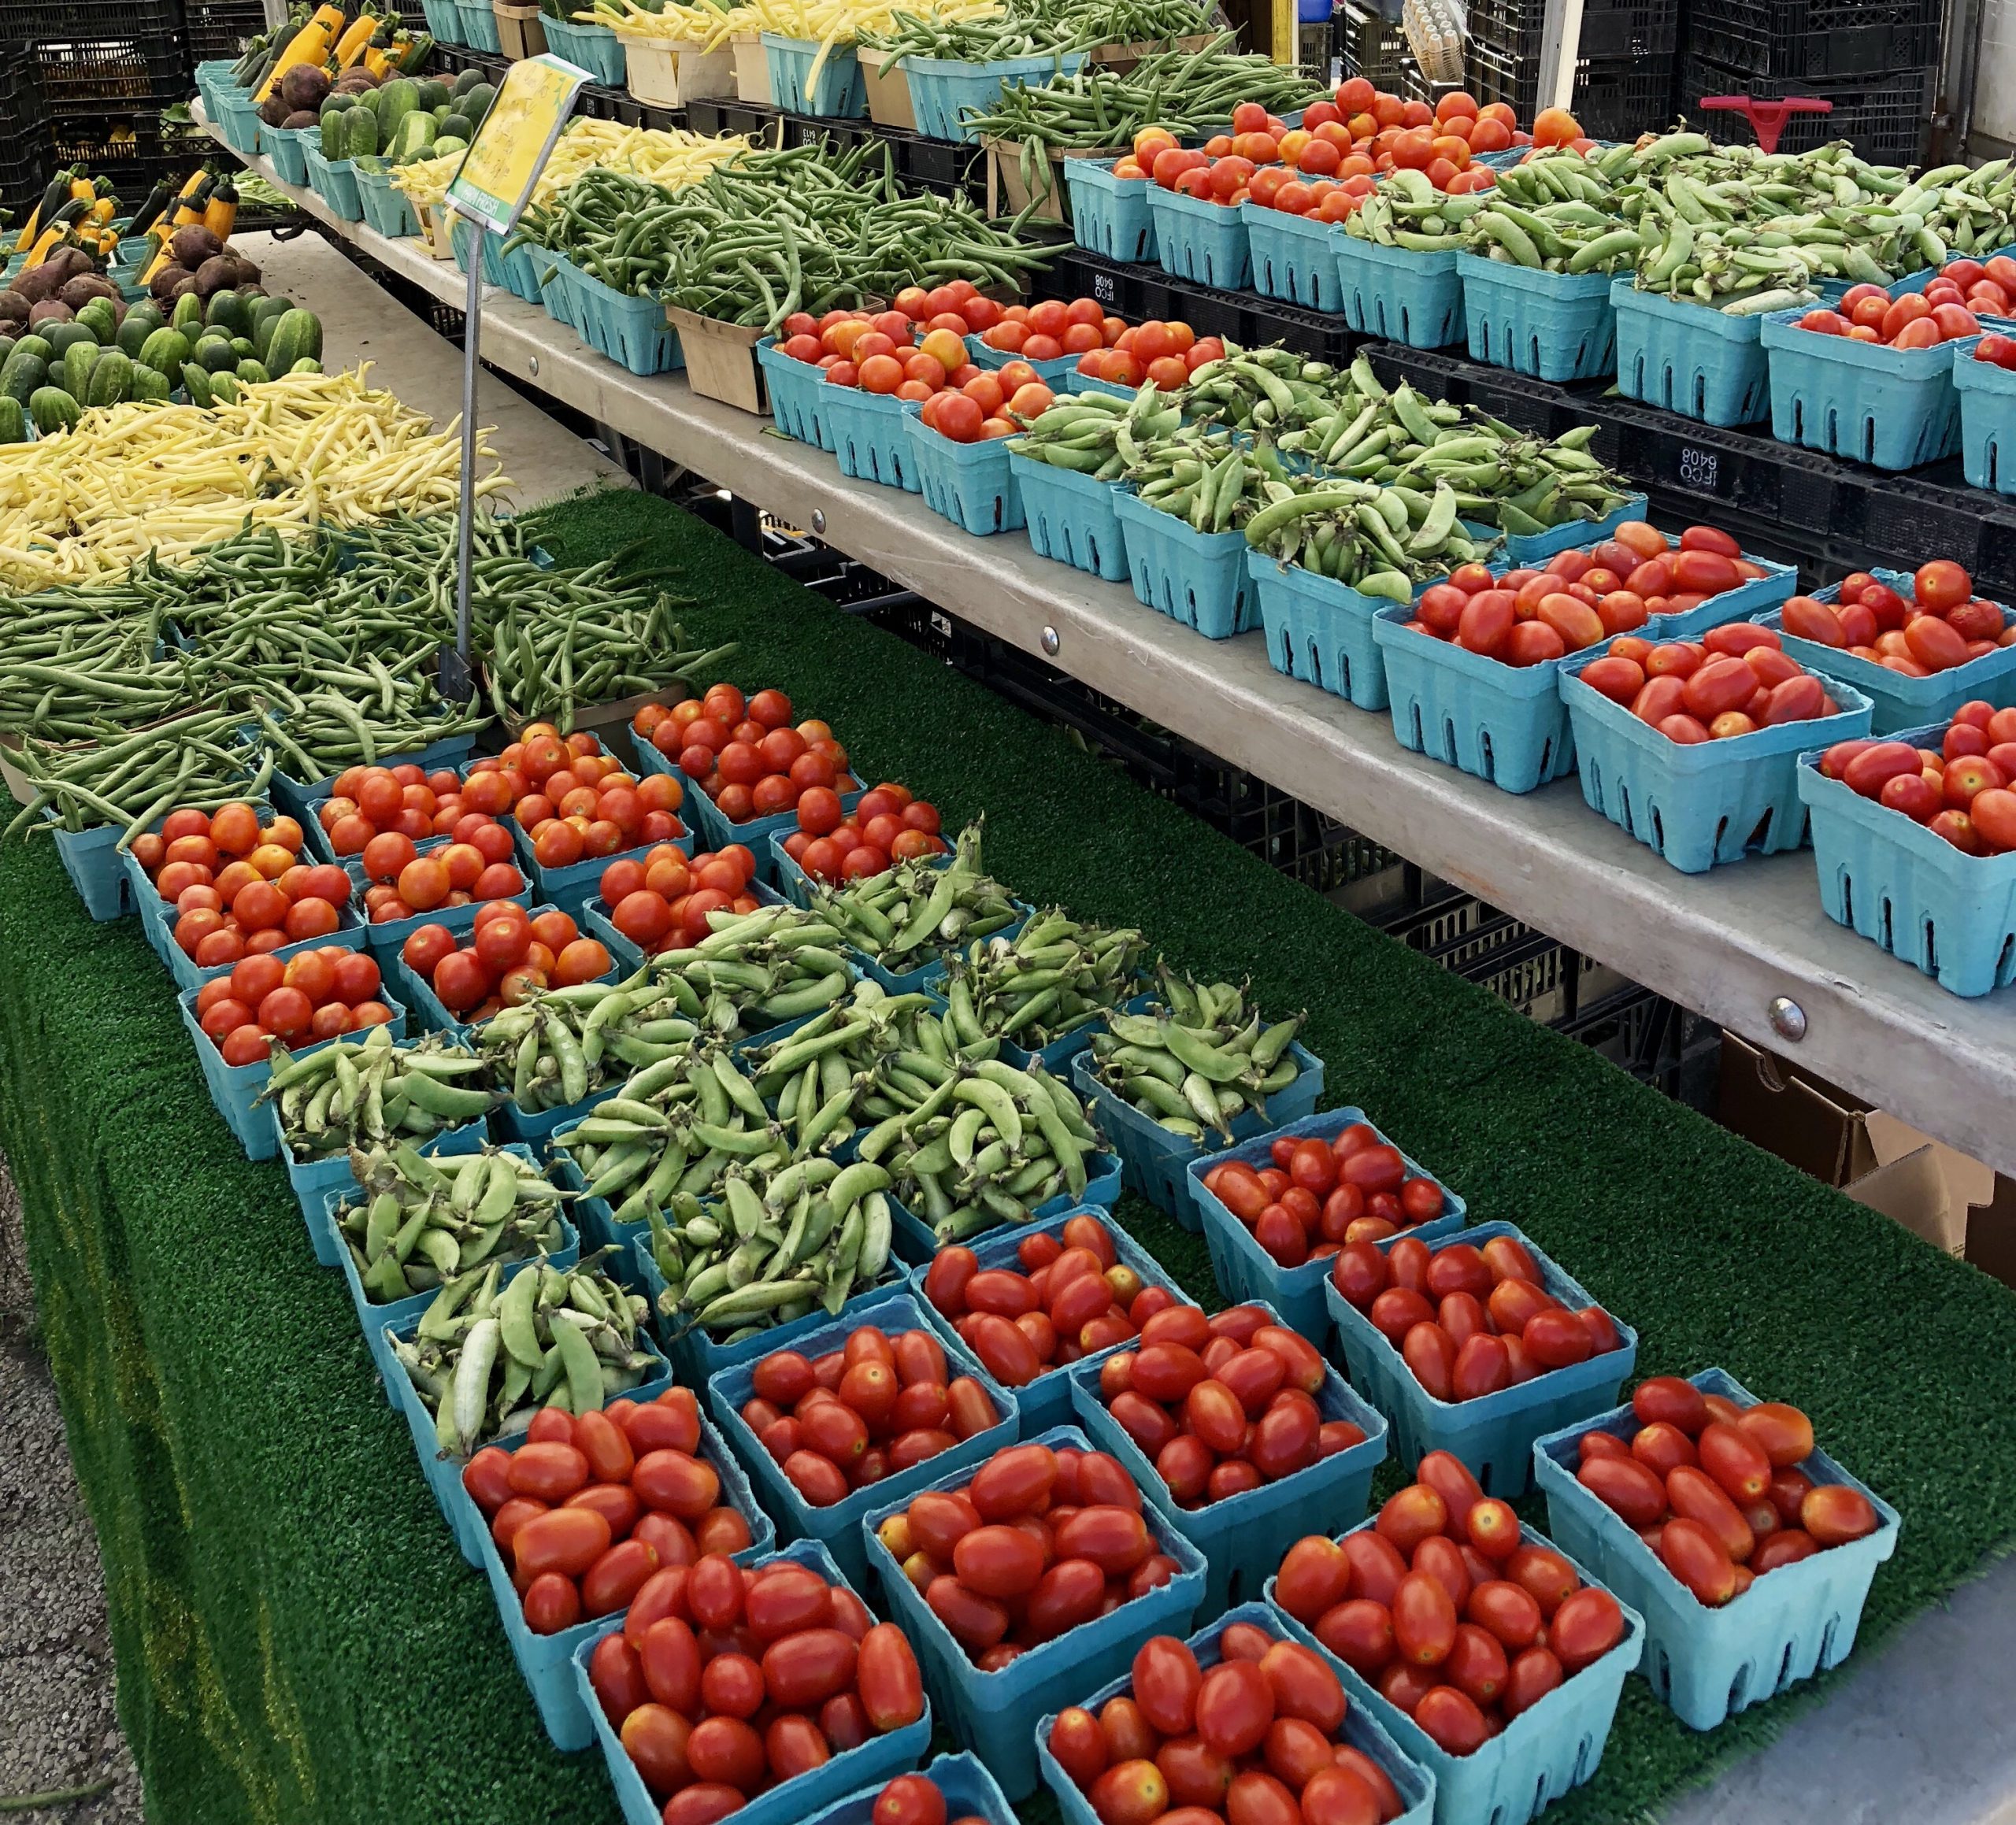 8 MISTAKES OF SELLING AT FARMER'S MARKET